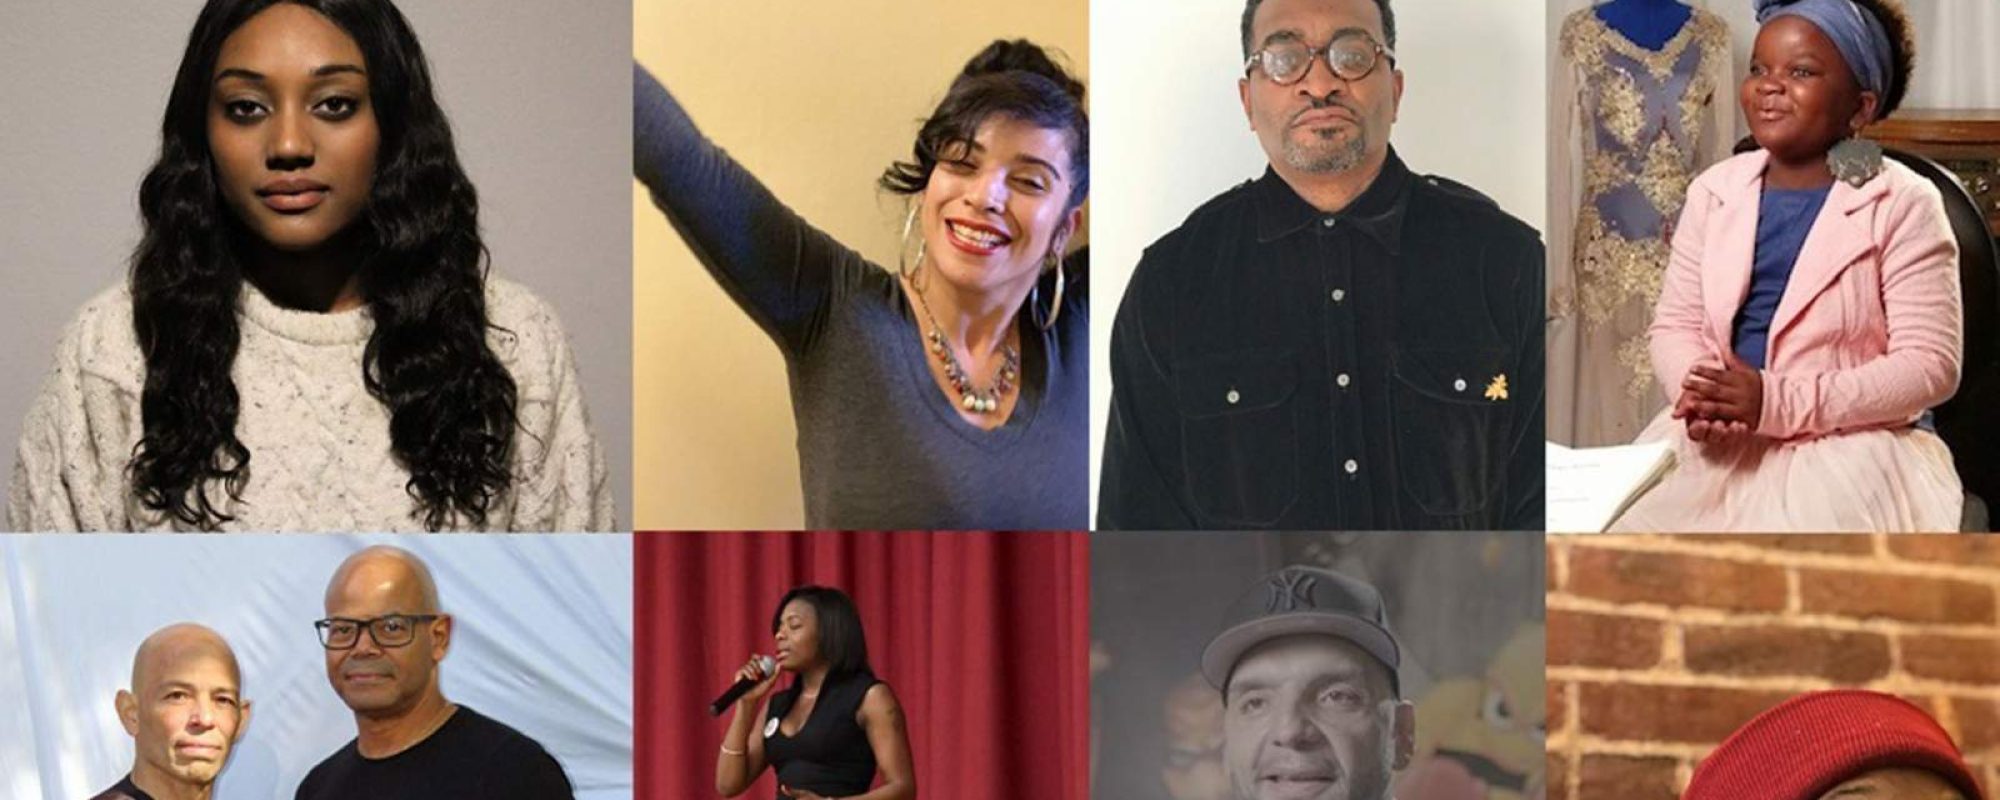 OVATION TO FEATURE LOCAL BRONX AND BROOKLYN ARTISTS IN PUBLIC SERVICE ANNOUNCEMENTS AS PART OF ITS STAND FOR THE ARTS INITIATIVE